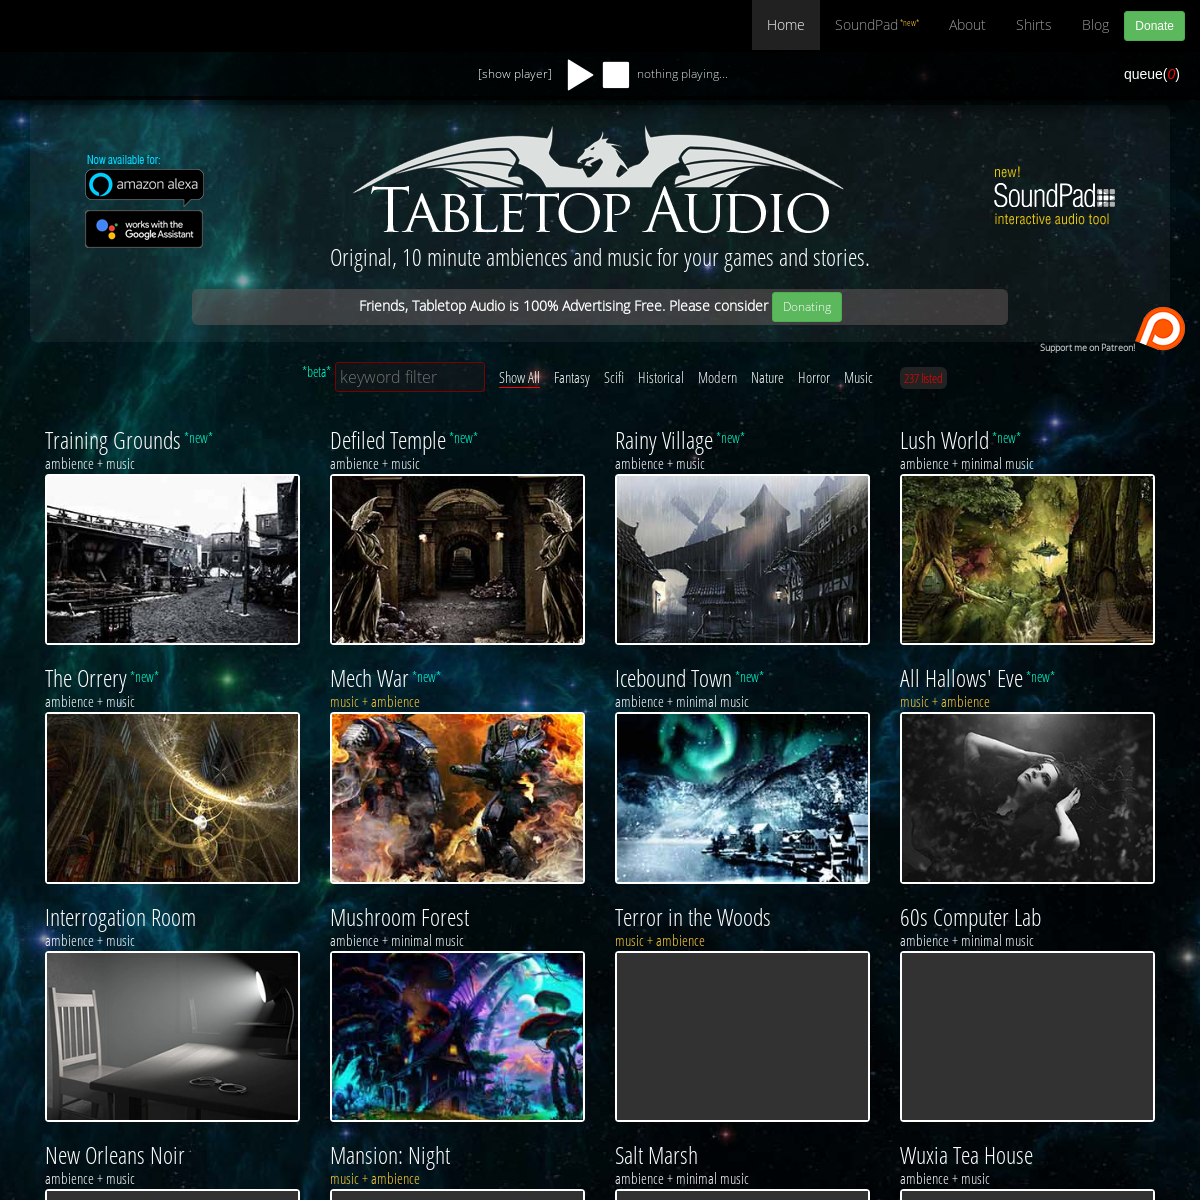 A complete backup of tabletopaudio.com